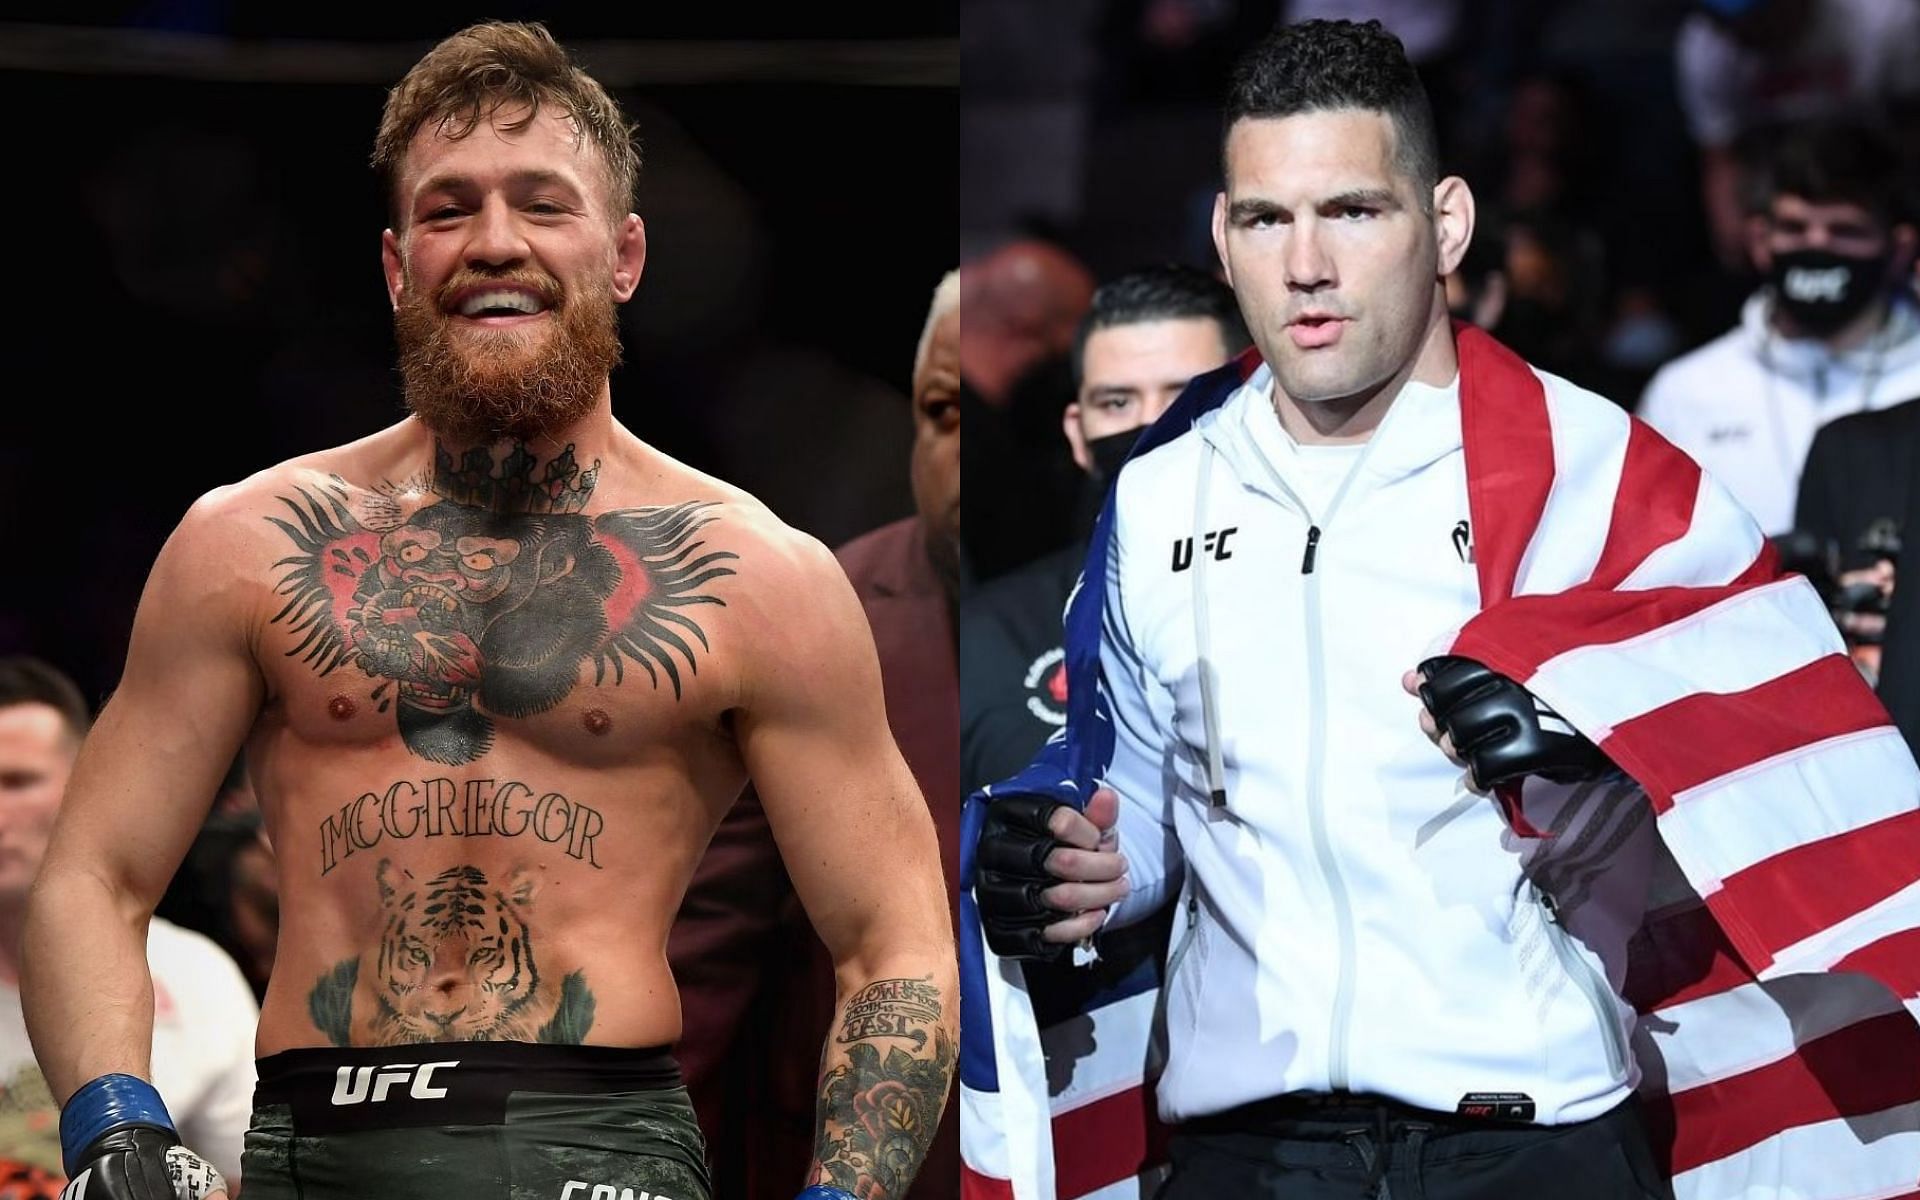 Conor McGregor (left) blasted by Chris Weidman (right) for his disrespectful trash-talk [Images Courtesy: @GettyImages, @chrisweidman on Instagram]